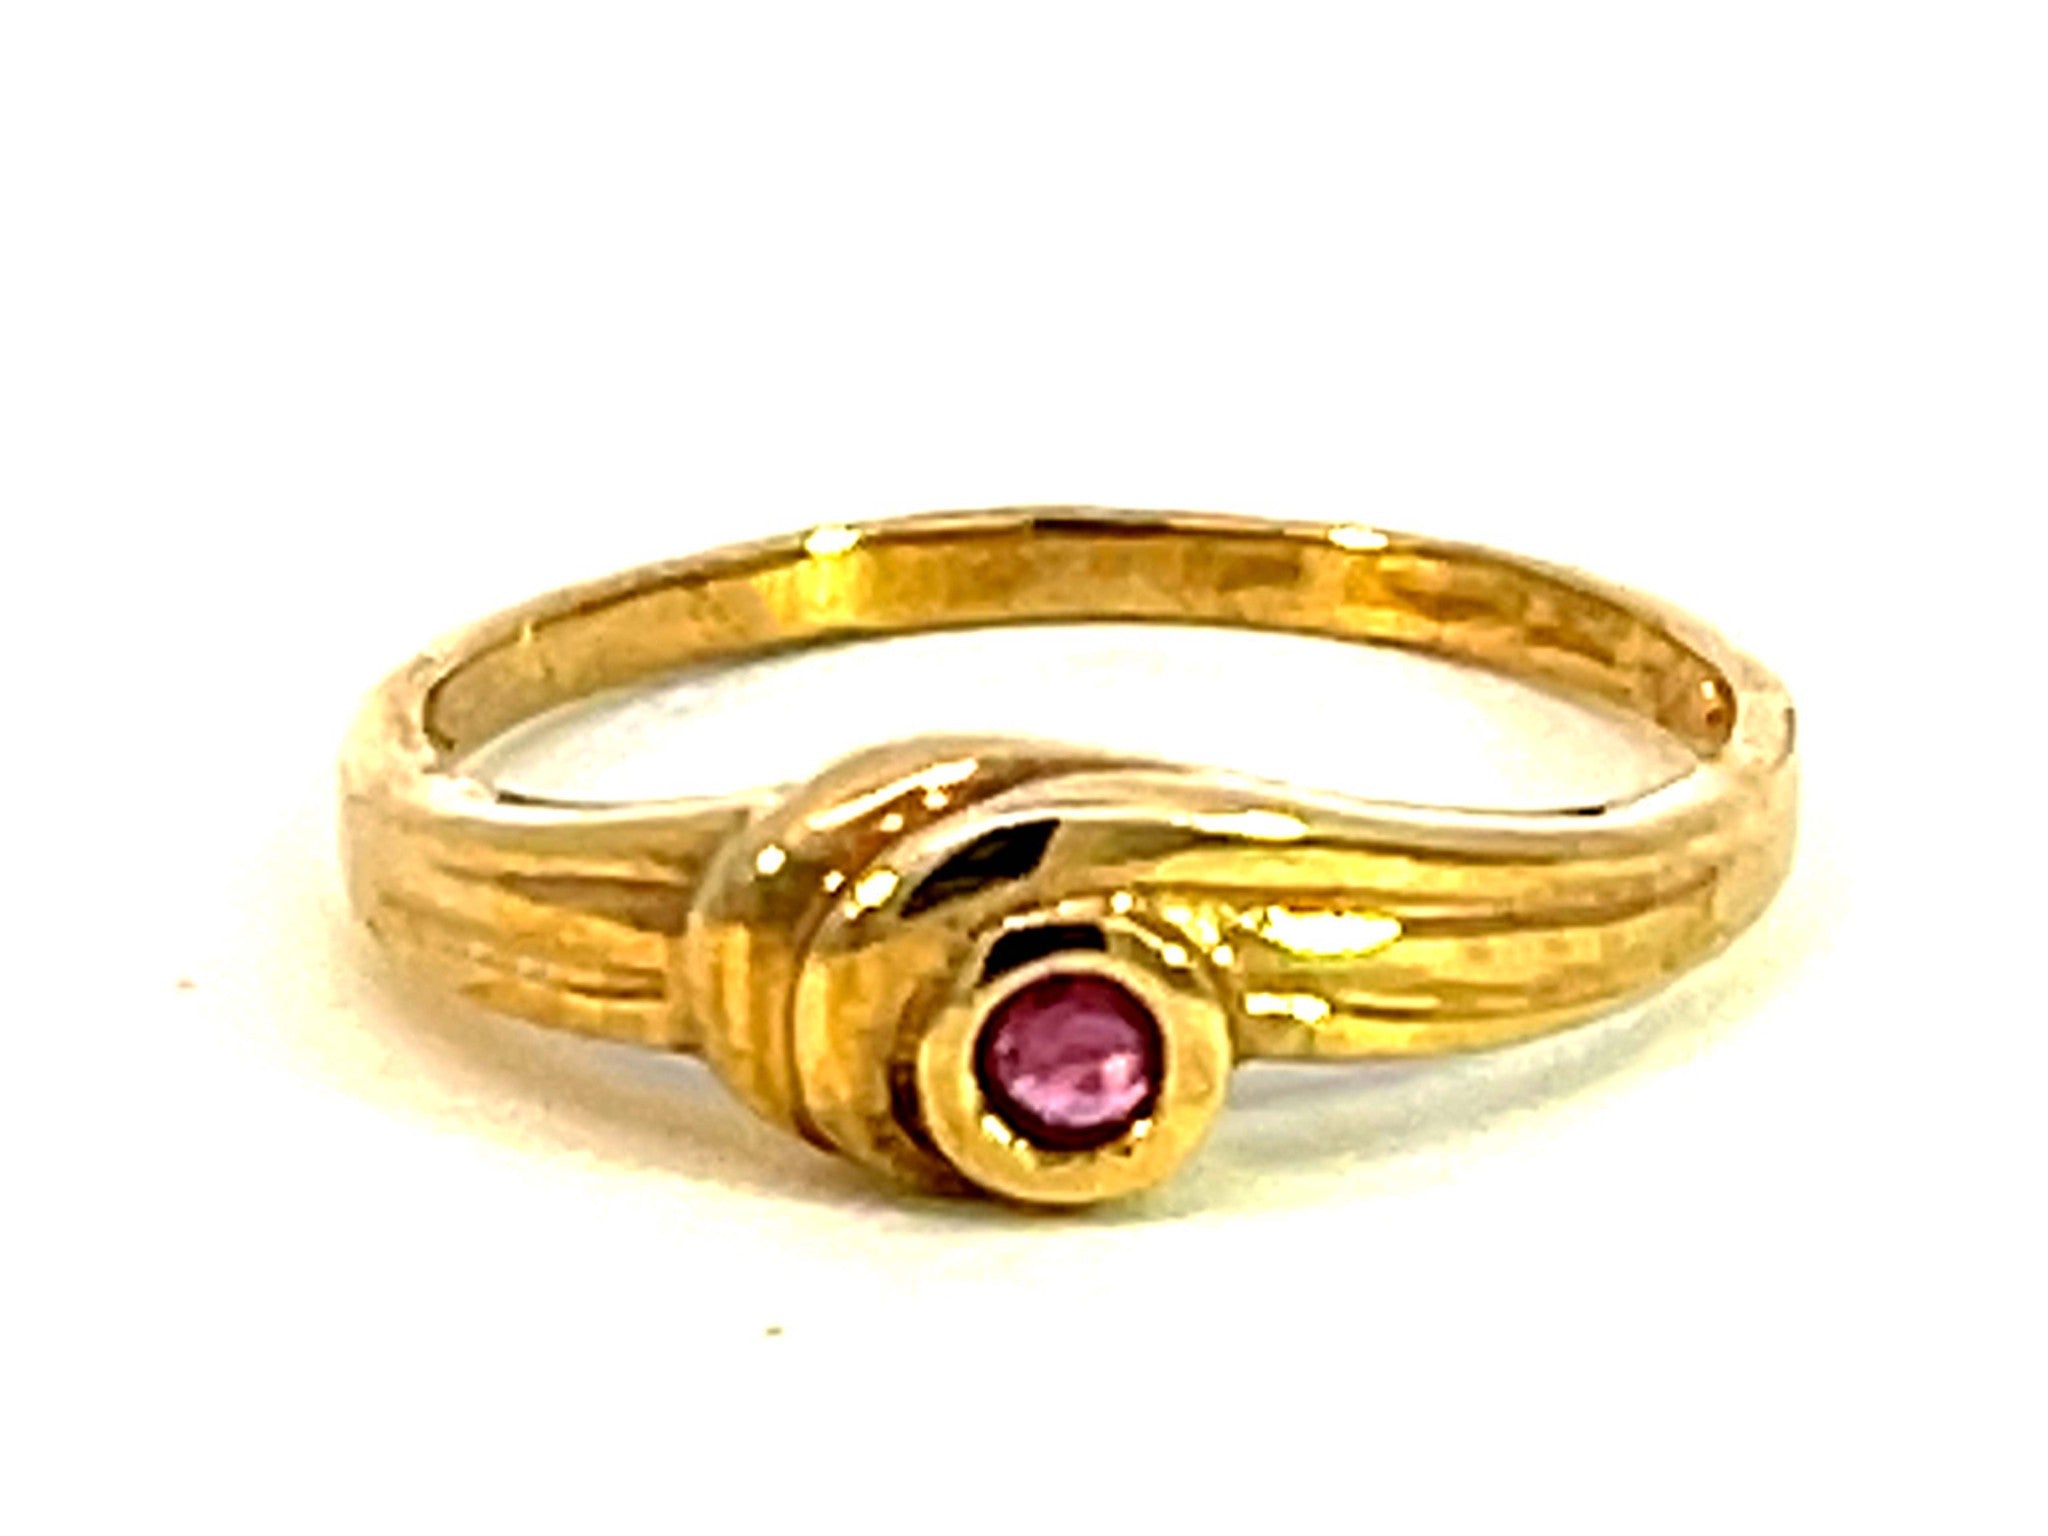 Ruby Swirl Band Ring in 14k Yellow Gold